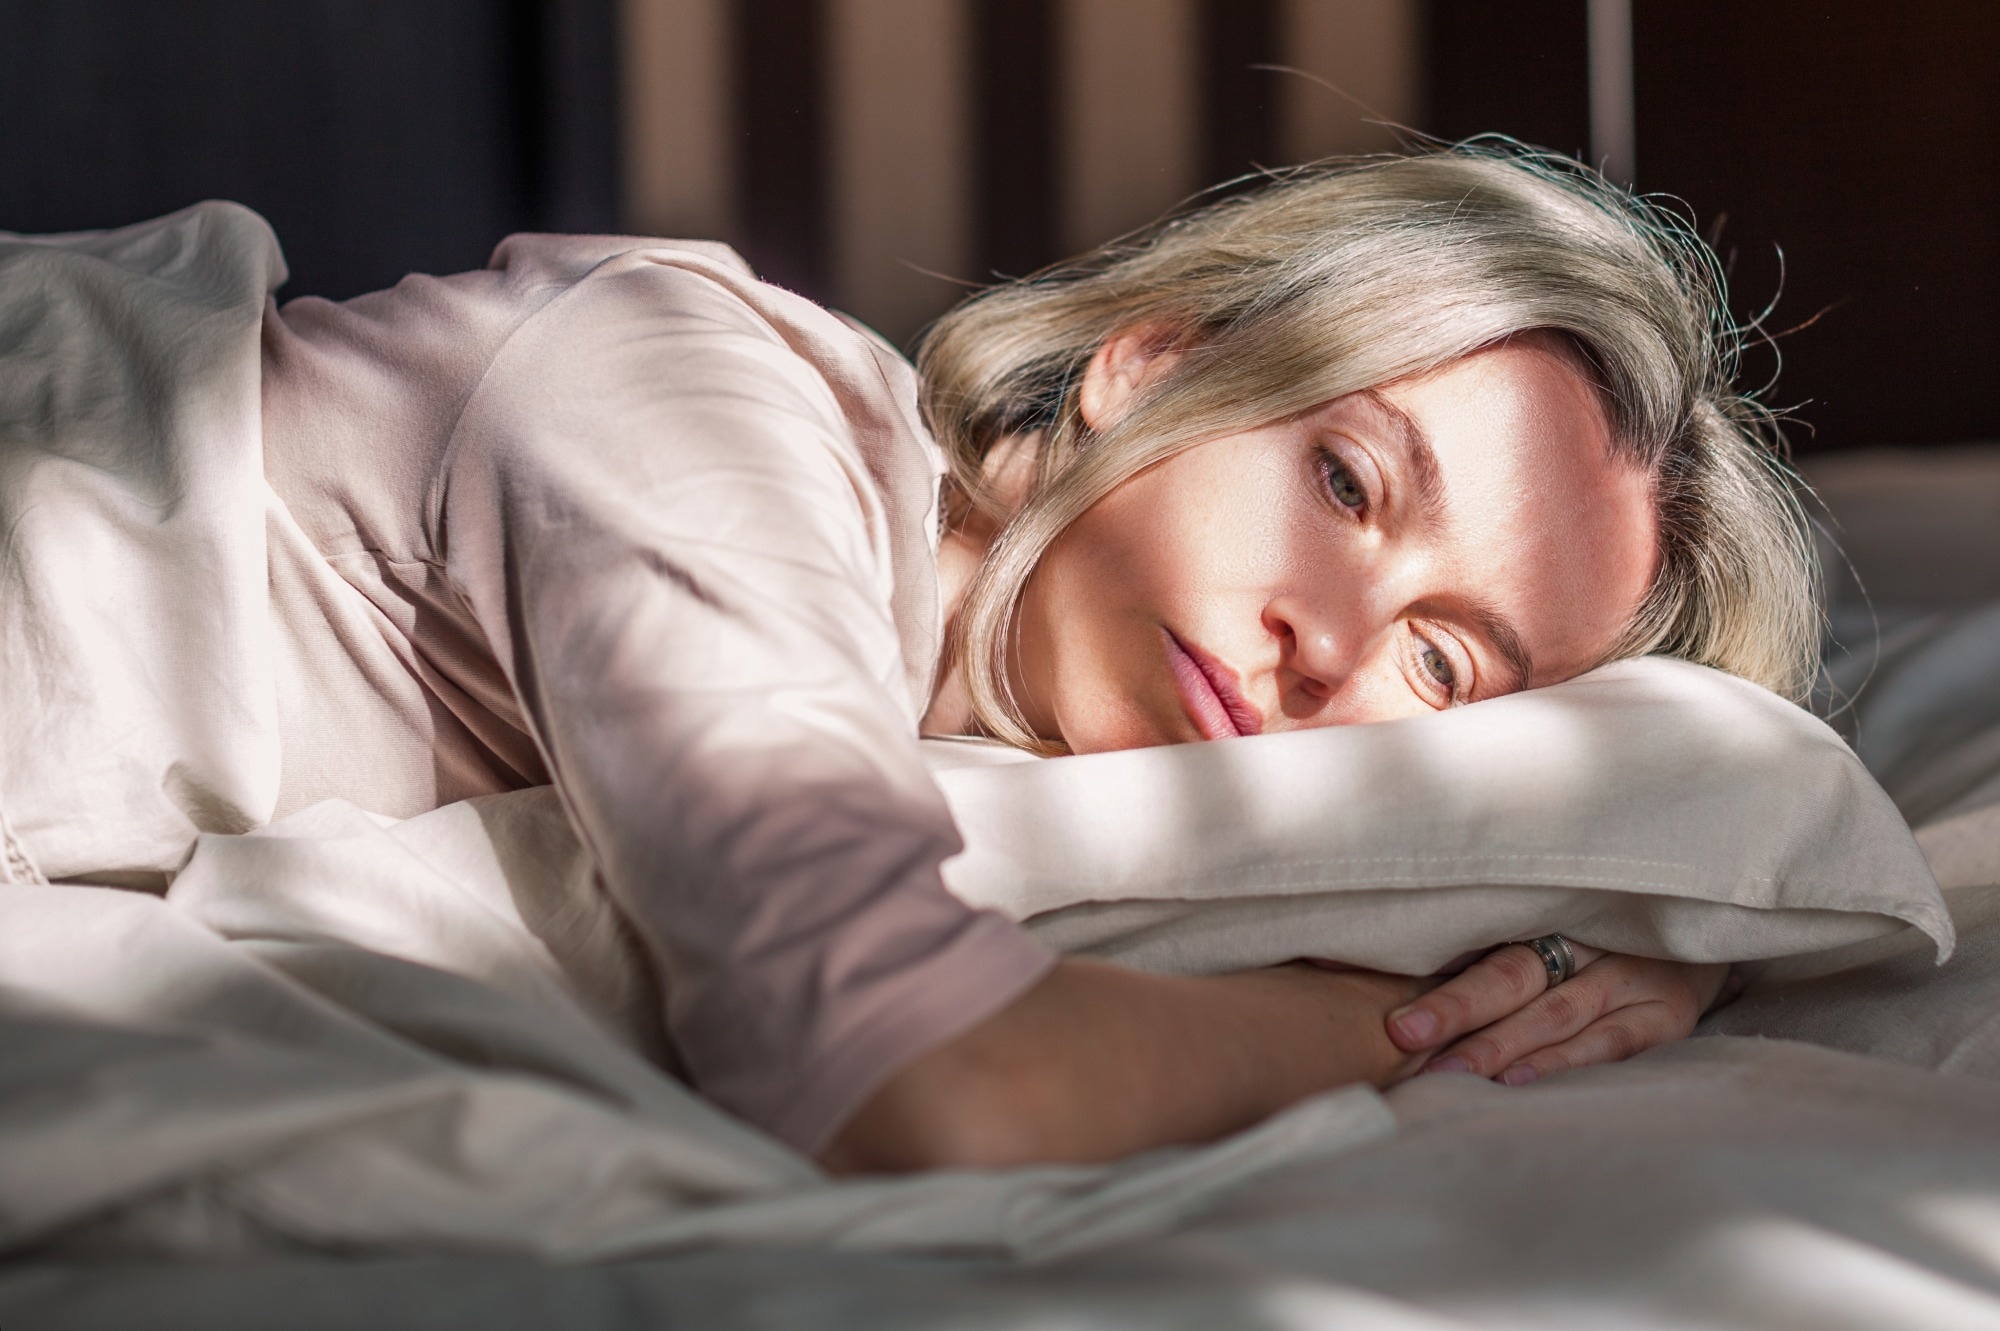 Insomnia linked to higher ovarian cancer risk and mortality in new genetic study